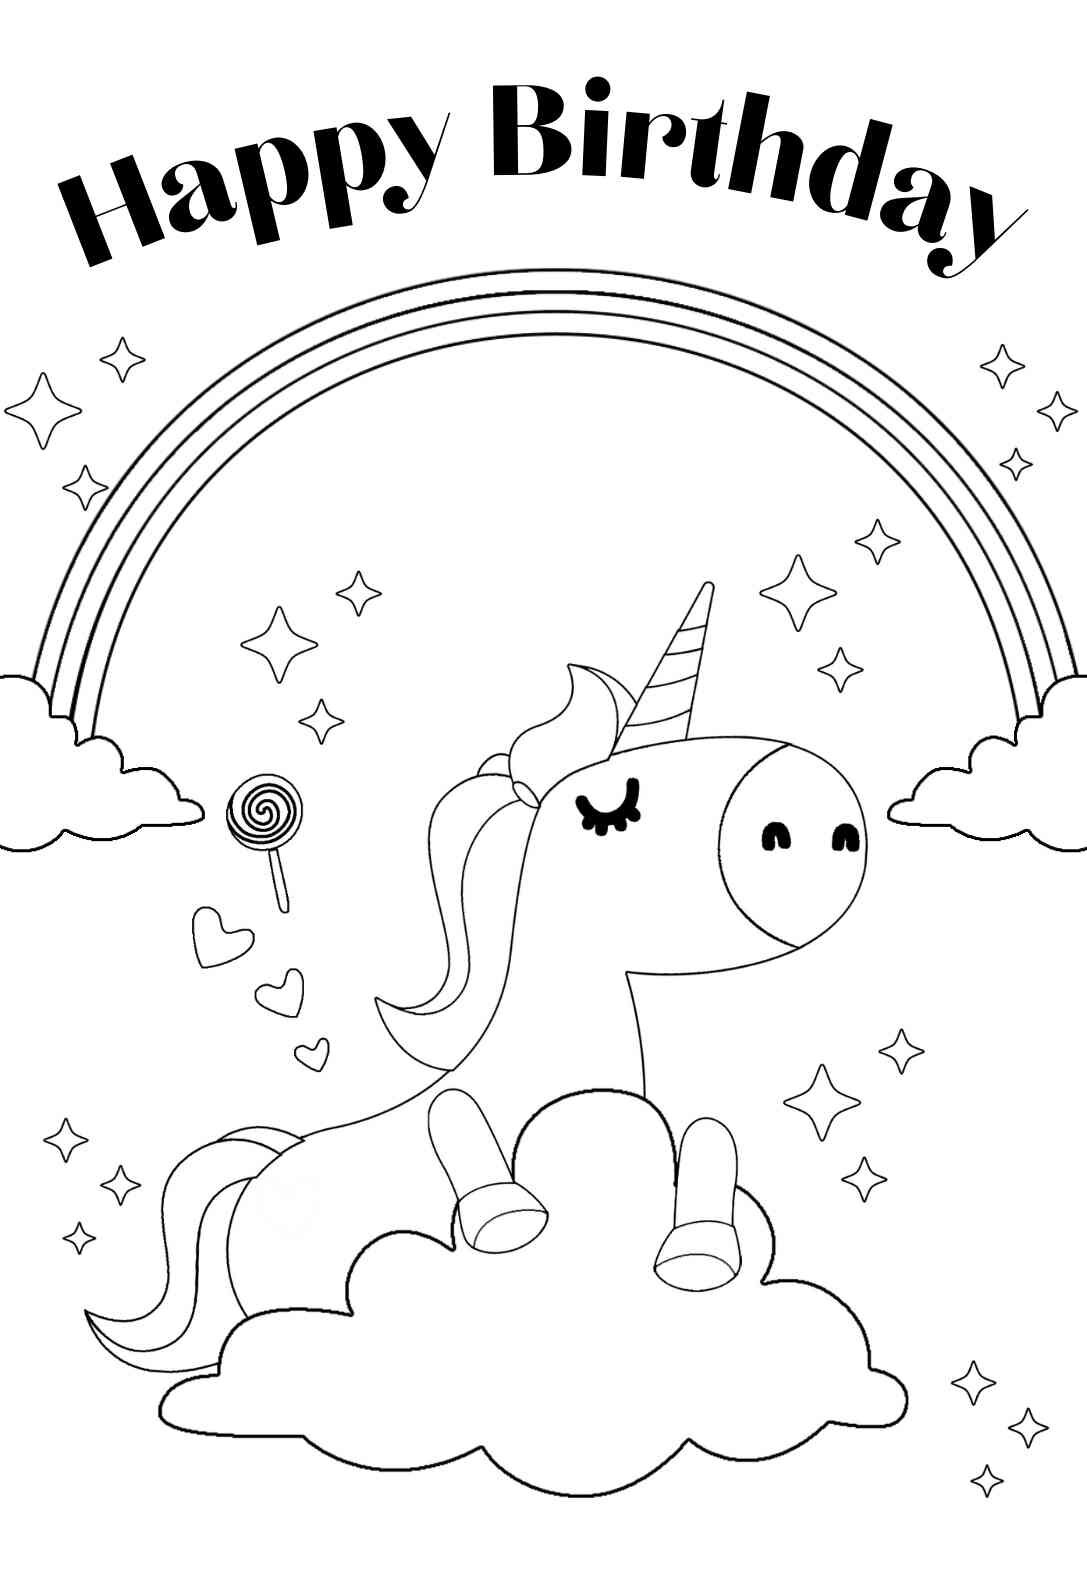 14 Unbelievable Unicorn Coloring Pages & Cards (free) — PRINTBIRTHDAY.CARDS